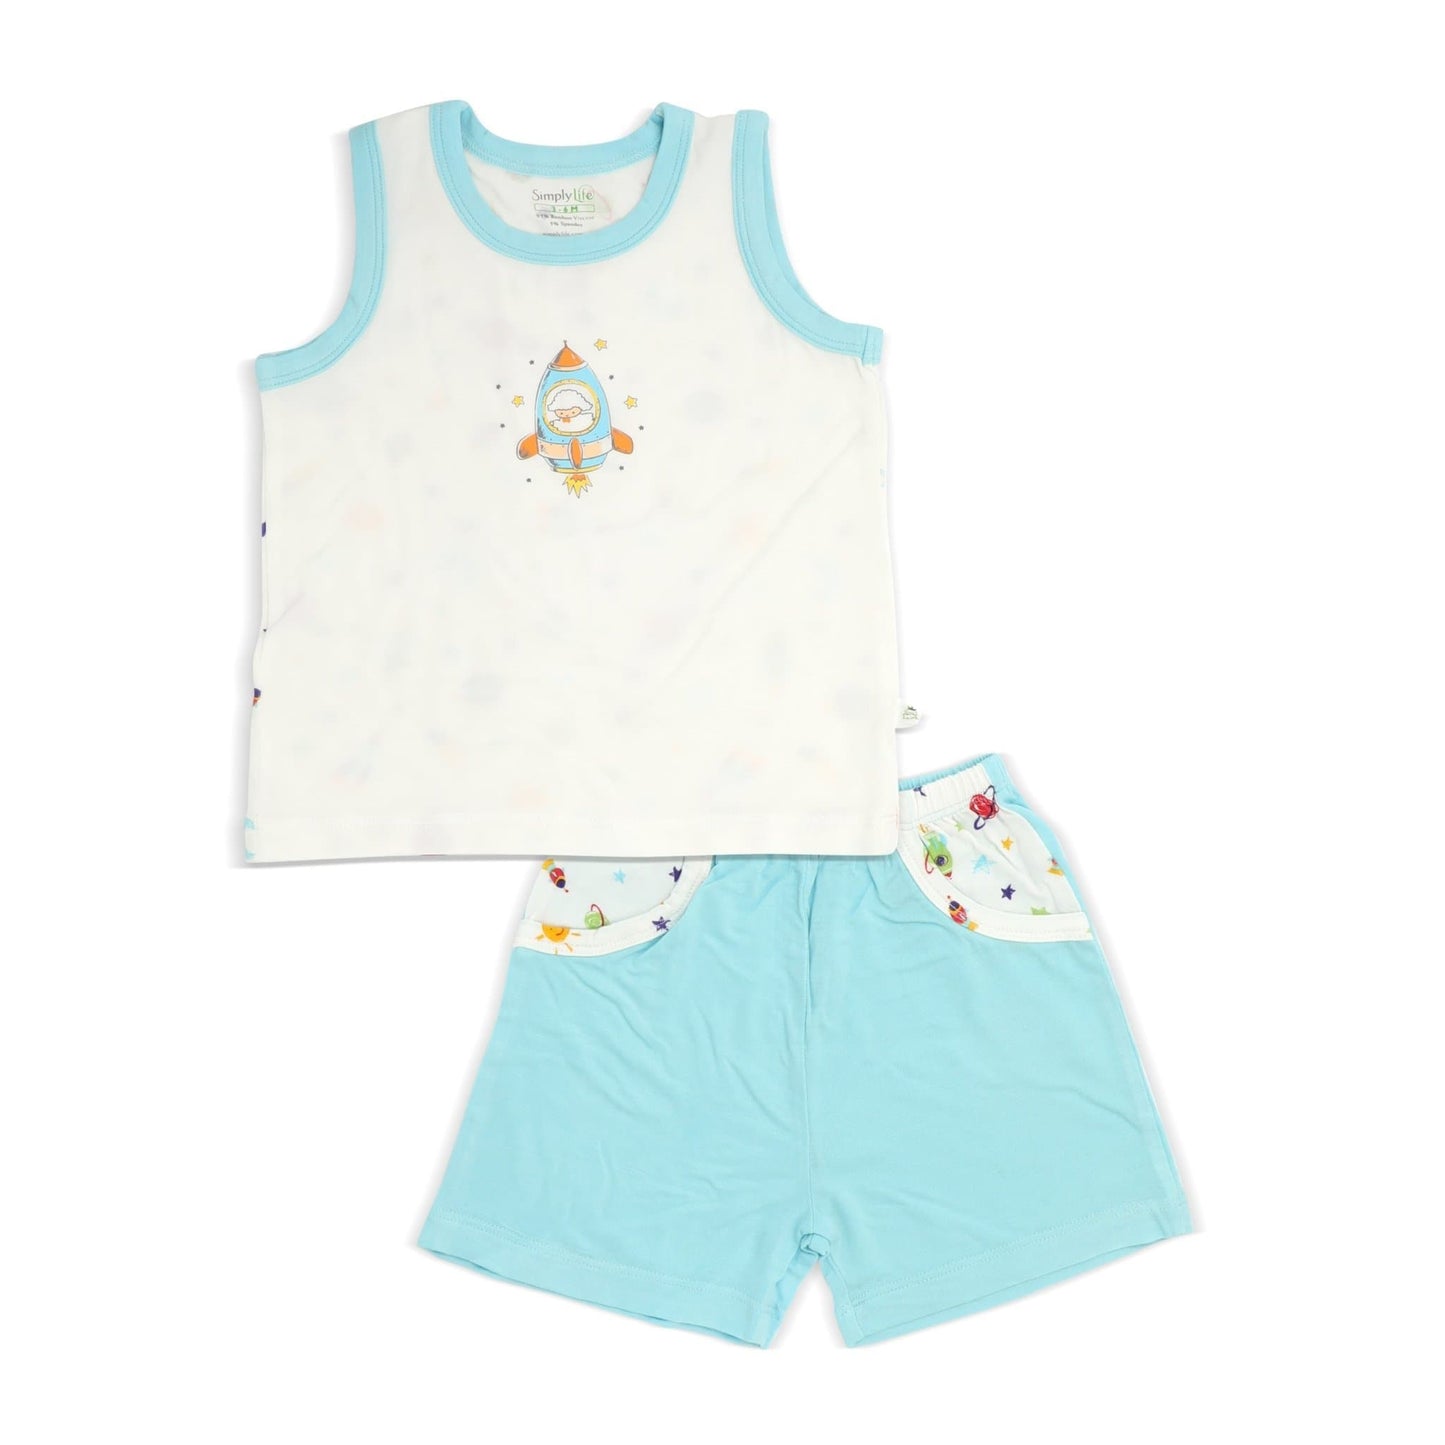 Spaceships - Shorts & Singlet Set by simplylifebaby